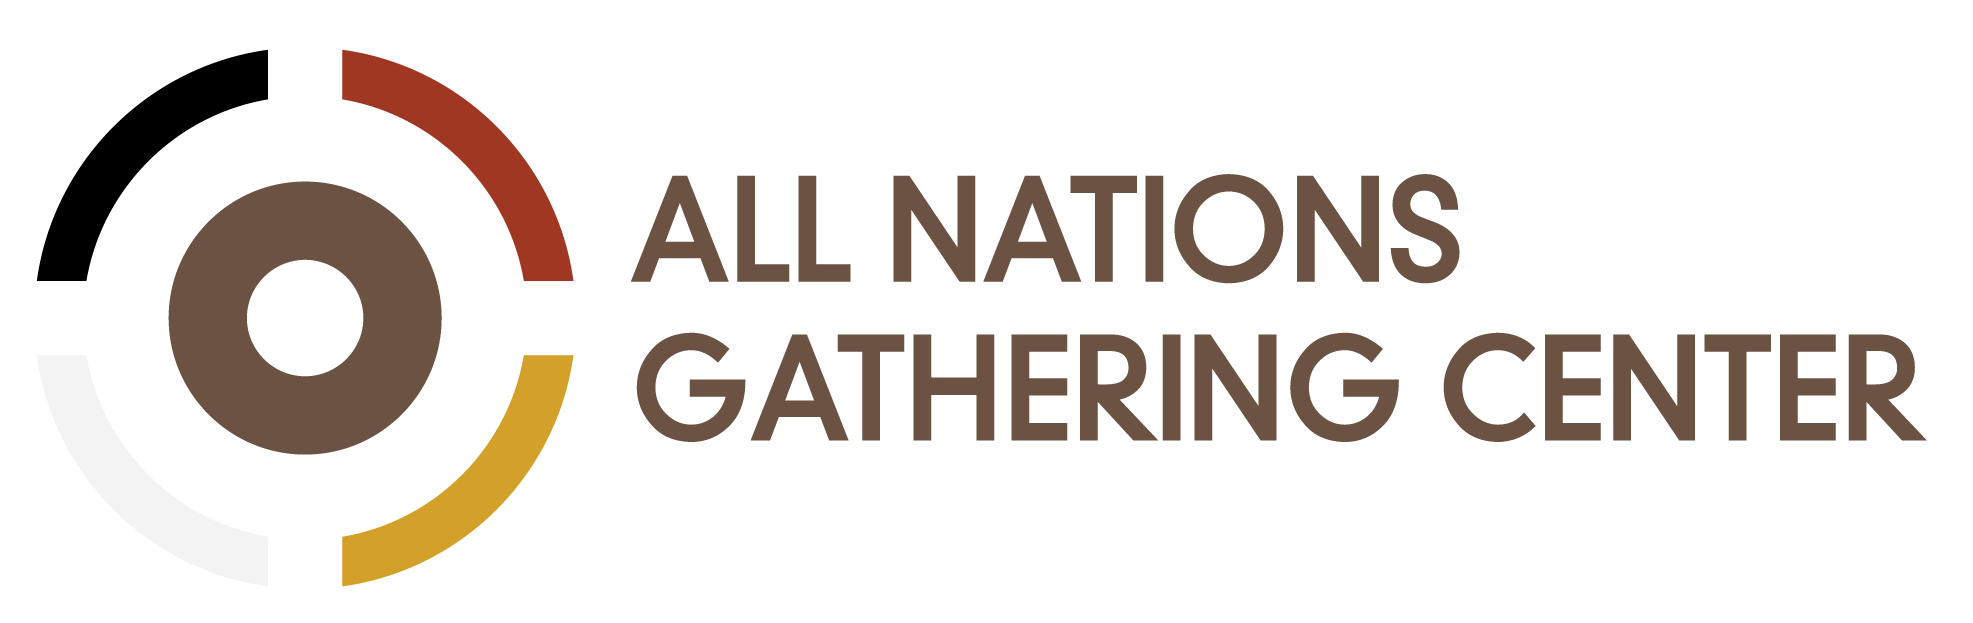 All Nations Gathering Center